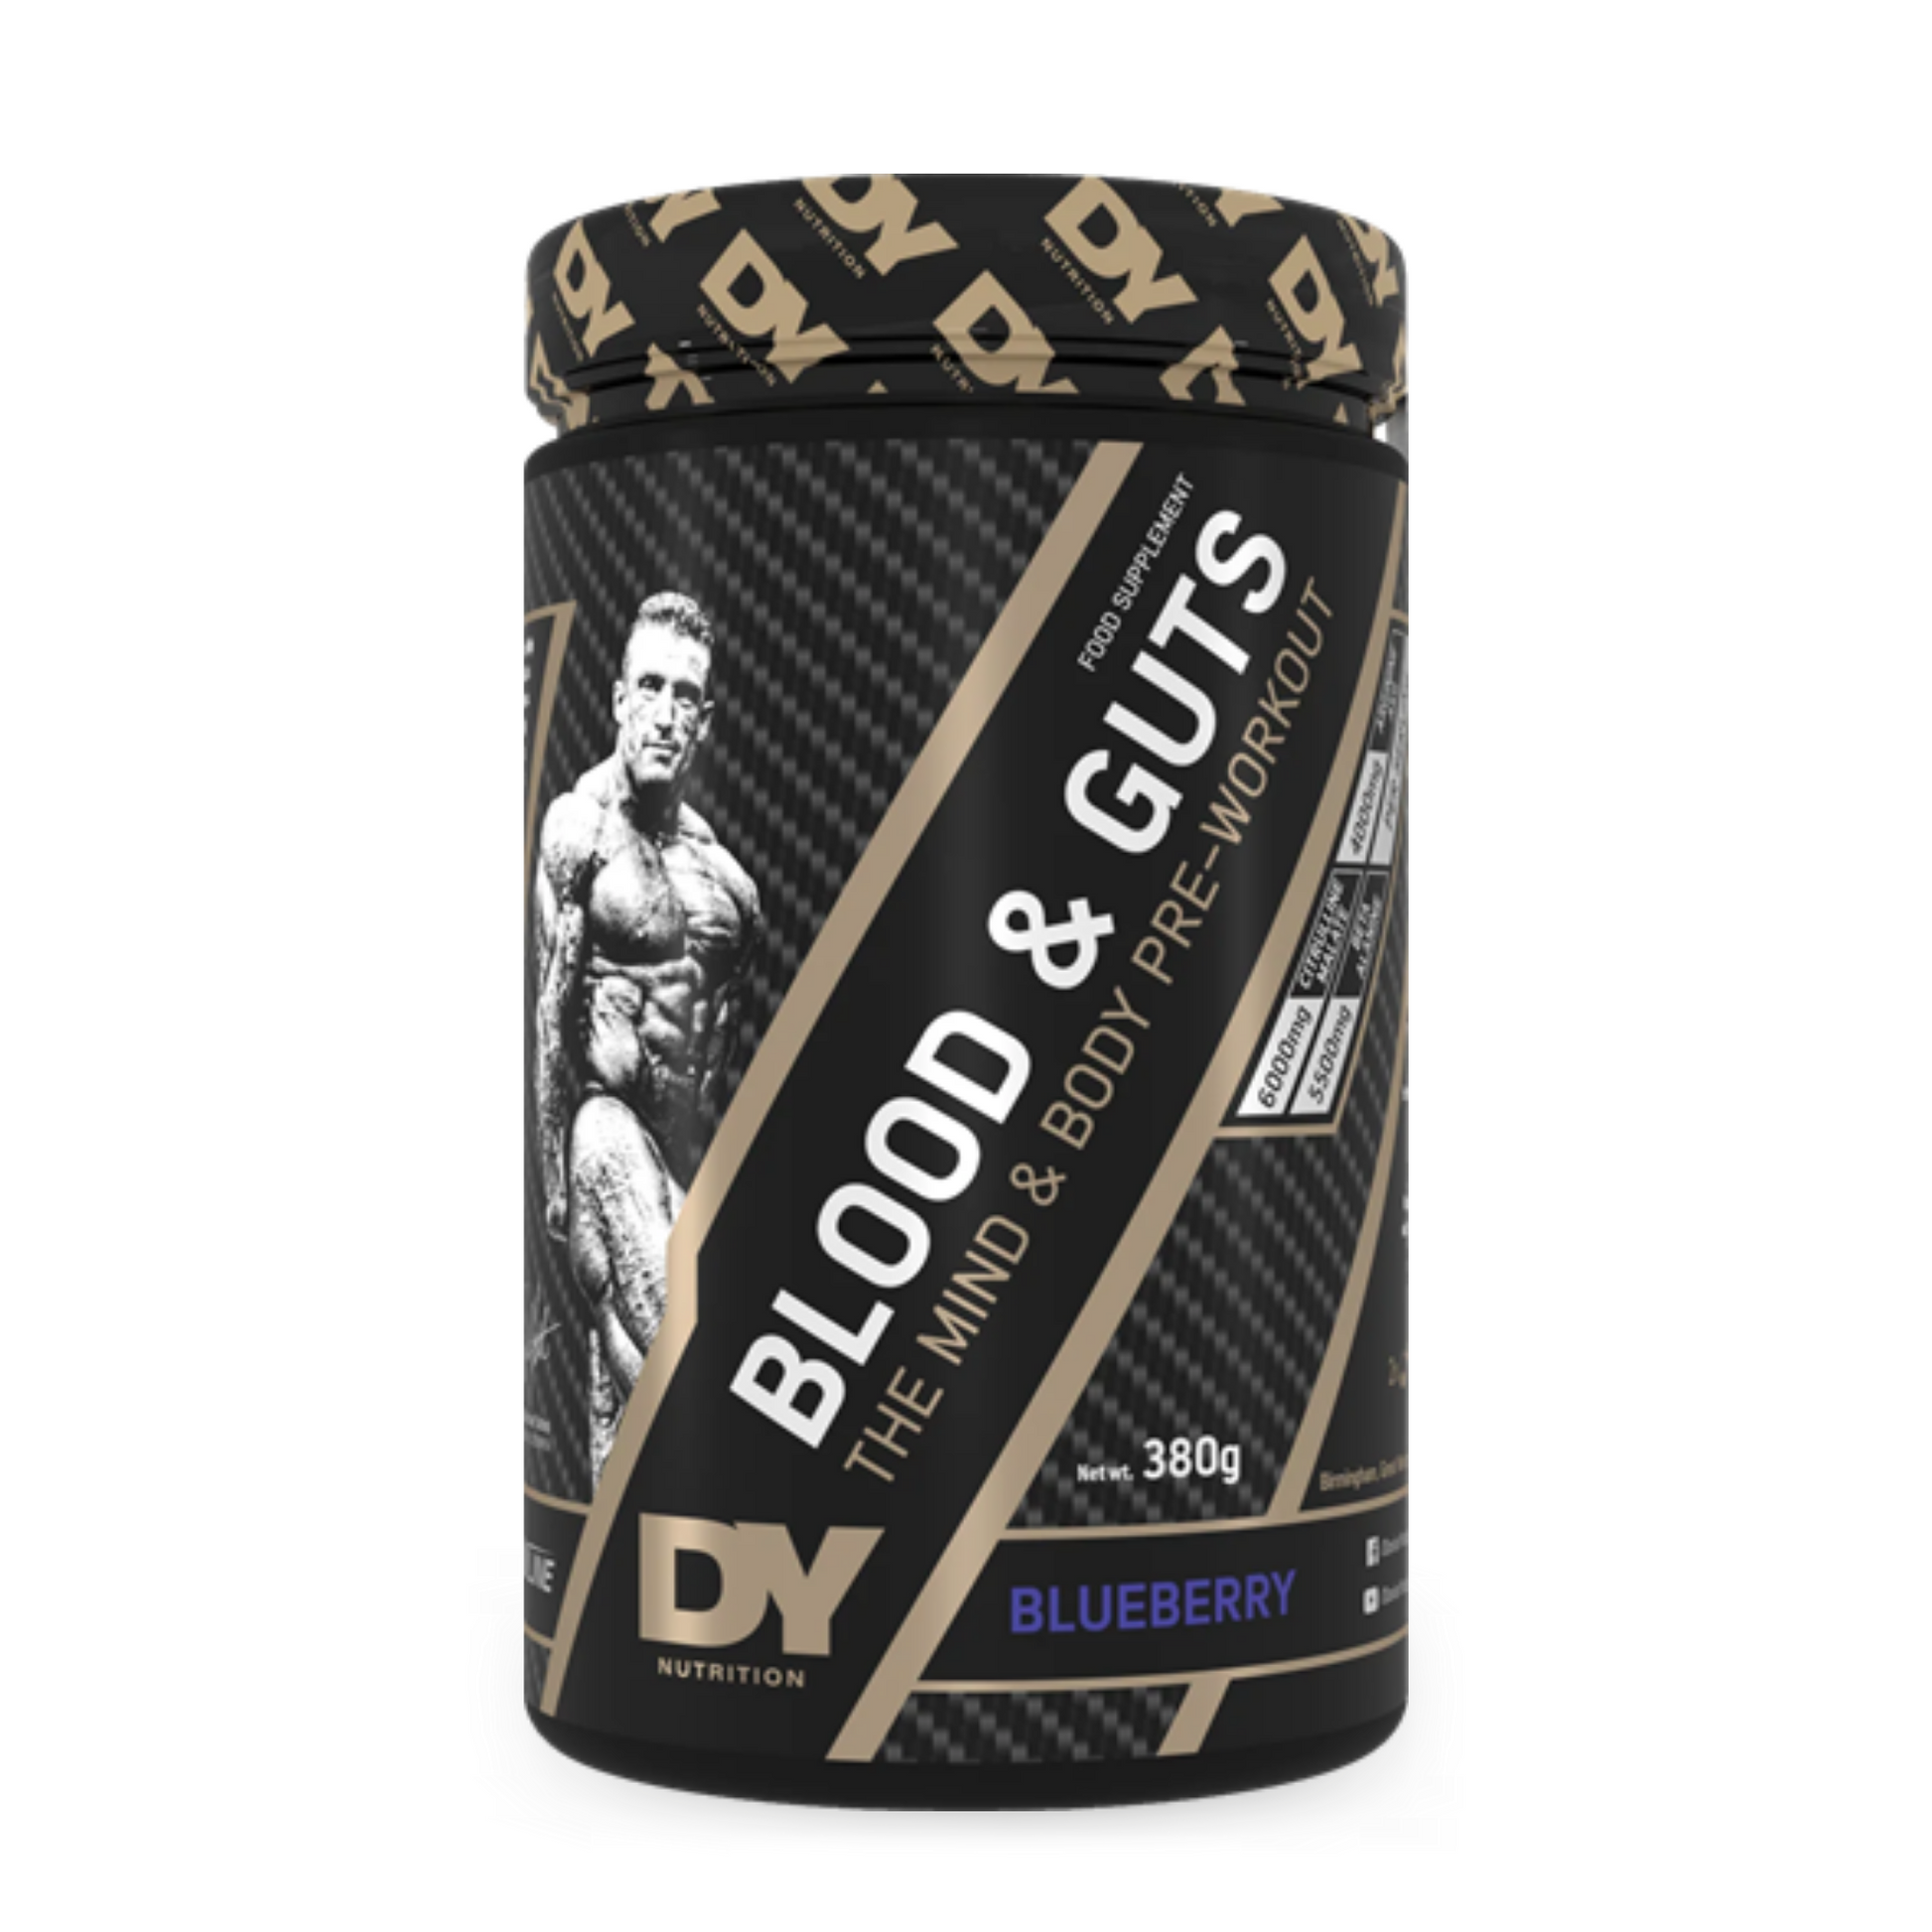 DY Nutrition Blood&Guts Pre Workout Blueberry